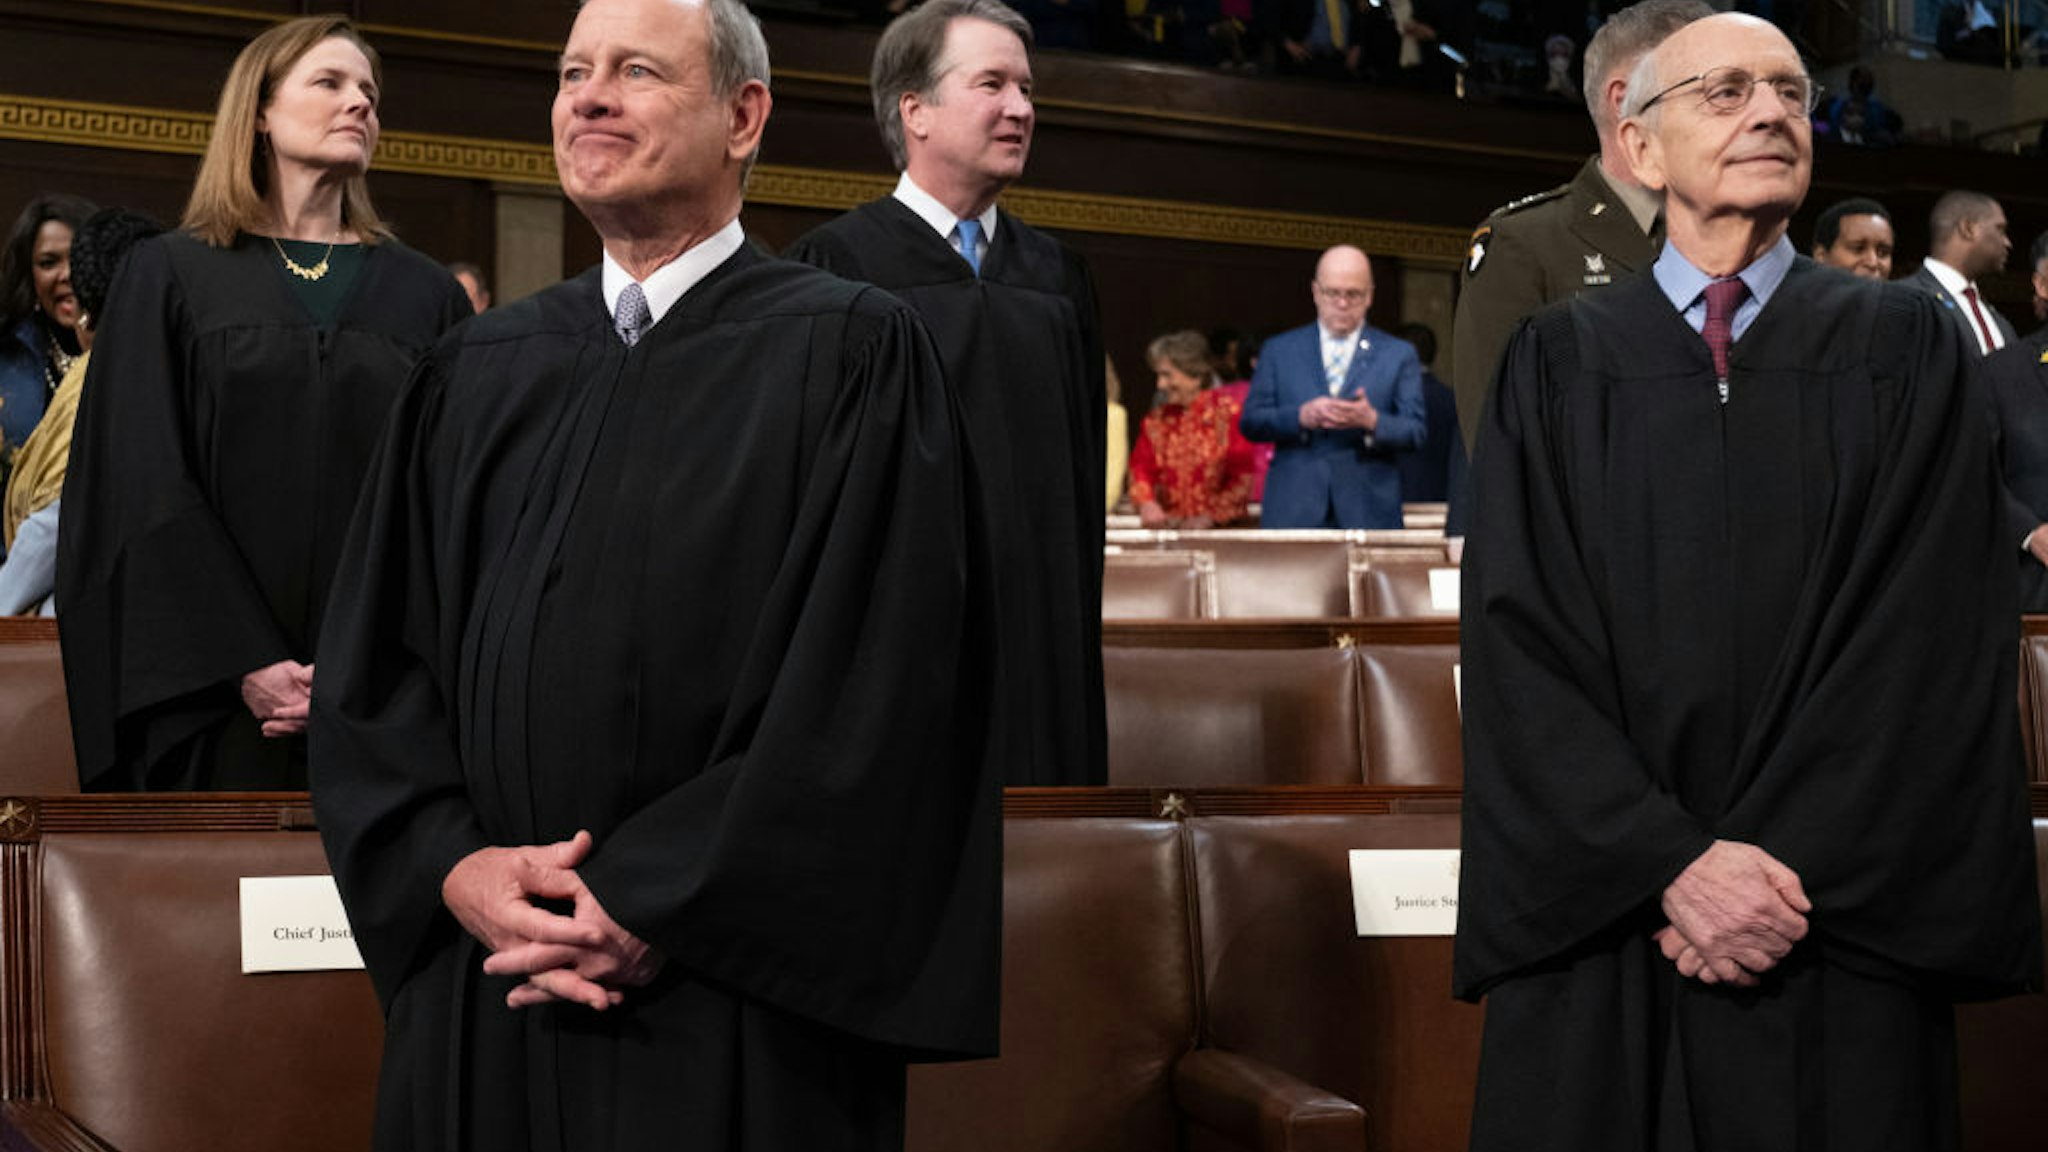 Supreme Court Chief Justice John Roberts and fellow justices attend the State of the Union address by President Joe Biden on March 1, 2022.